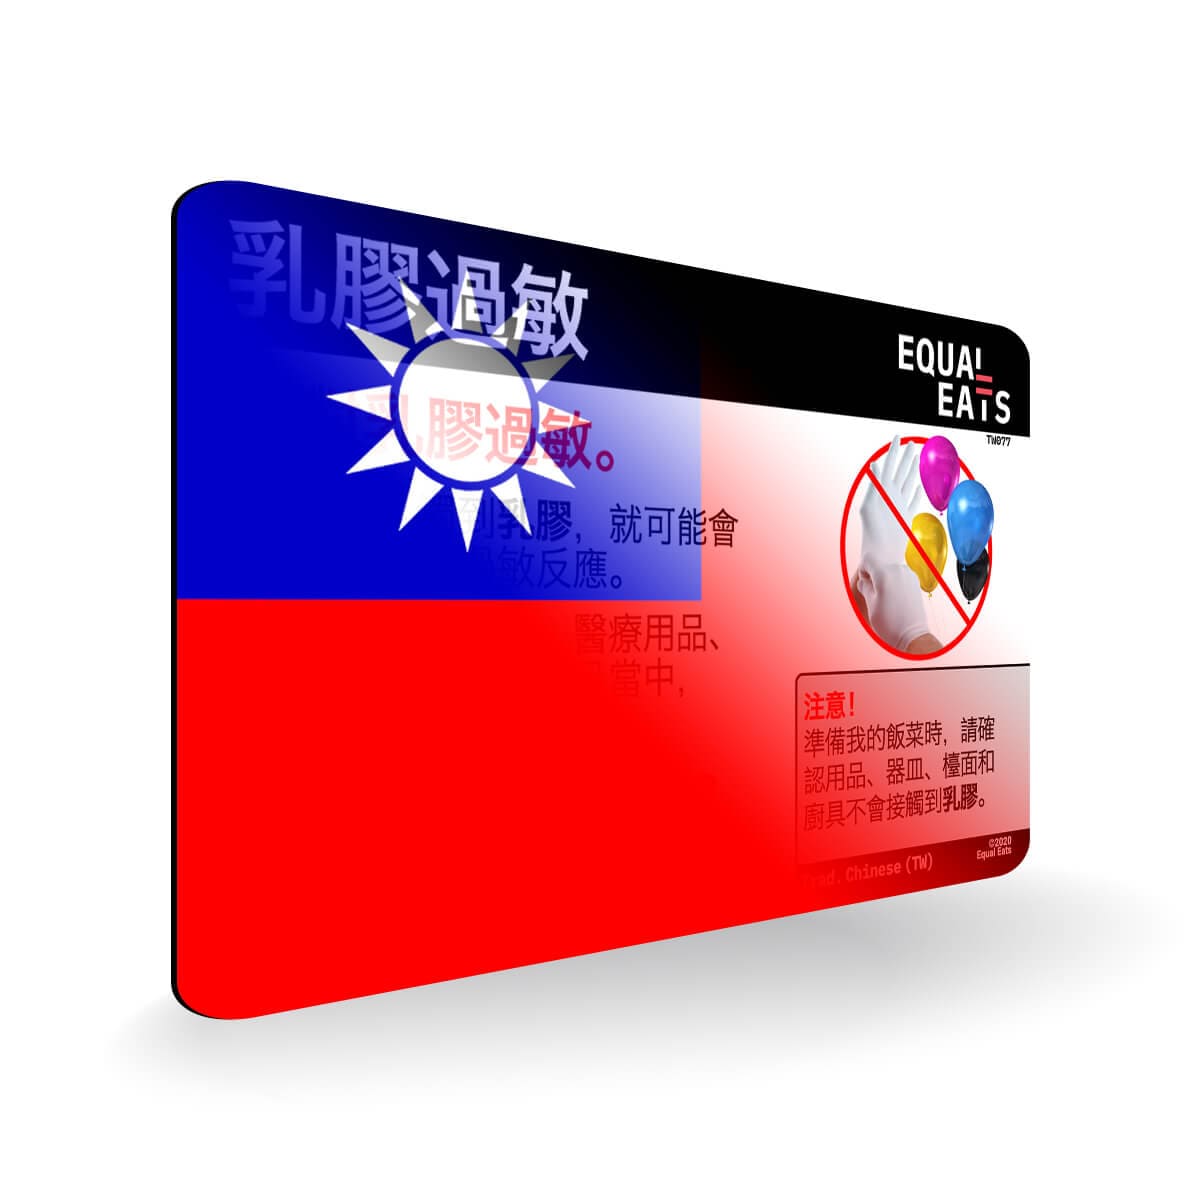 Latex Allergy in Traditional Chinese. Latex Allergy Travel Card for Taiwan